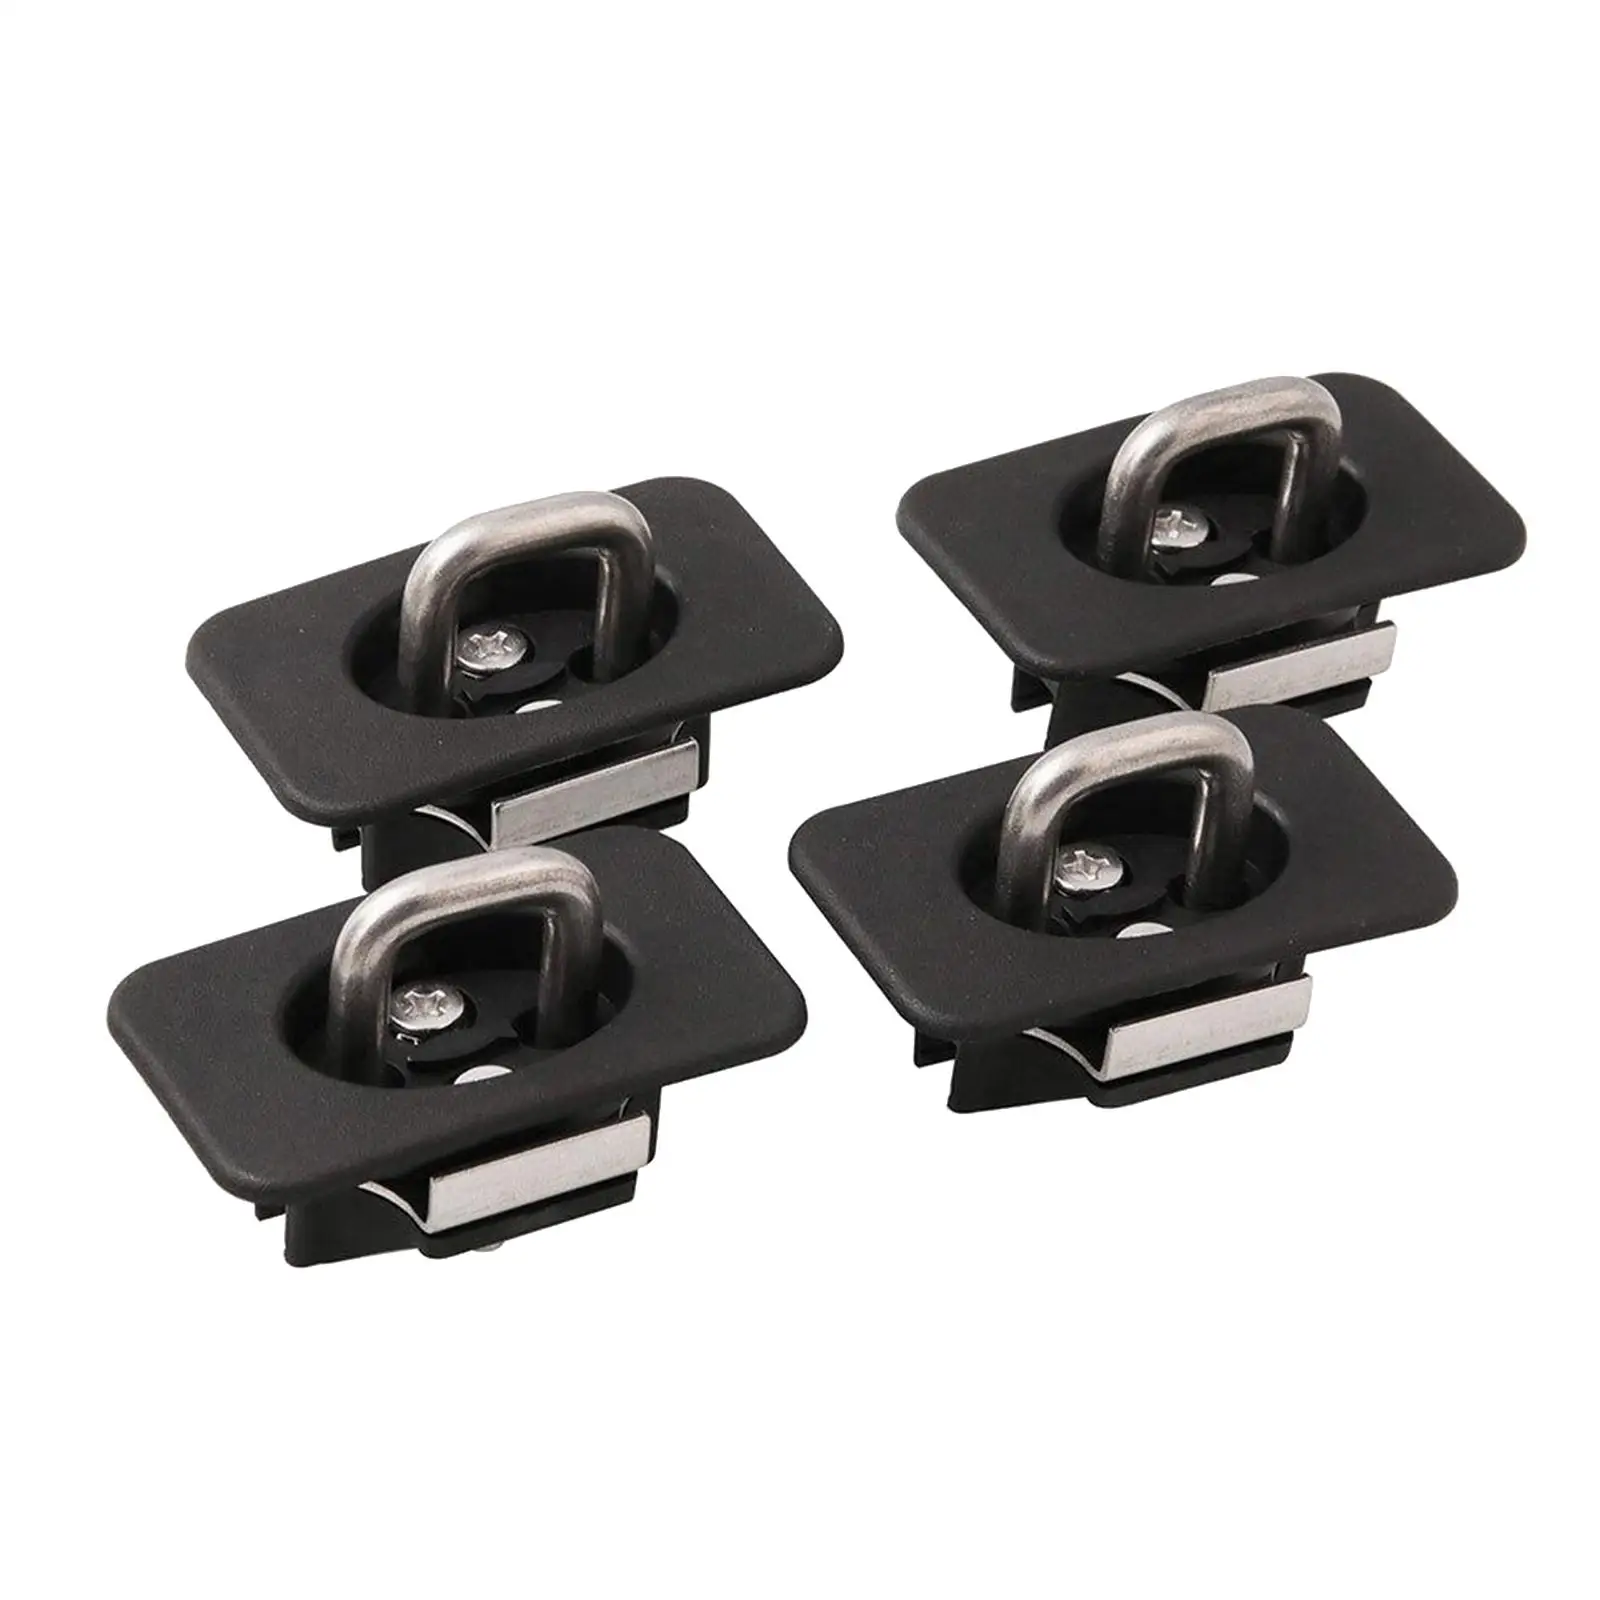 4x Pickup Truck Tie Down Anchors Fit for F 150 1998-2014 Super-Duty Car Accessories